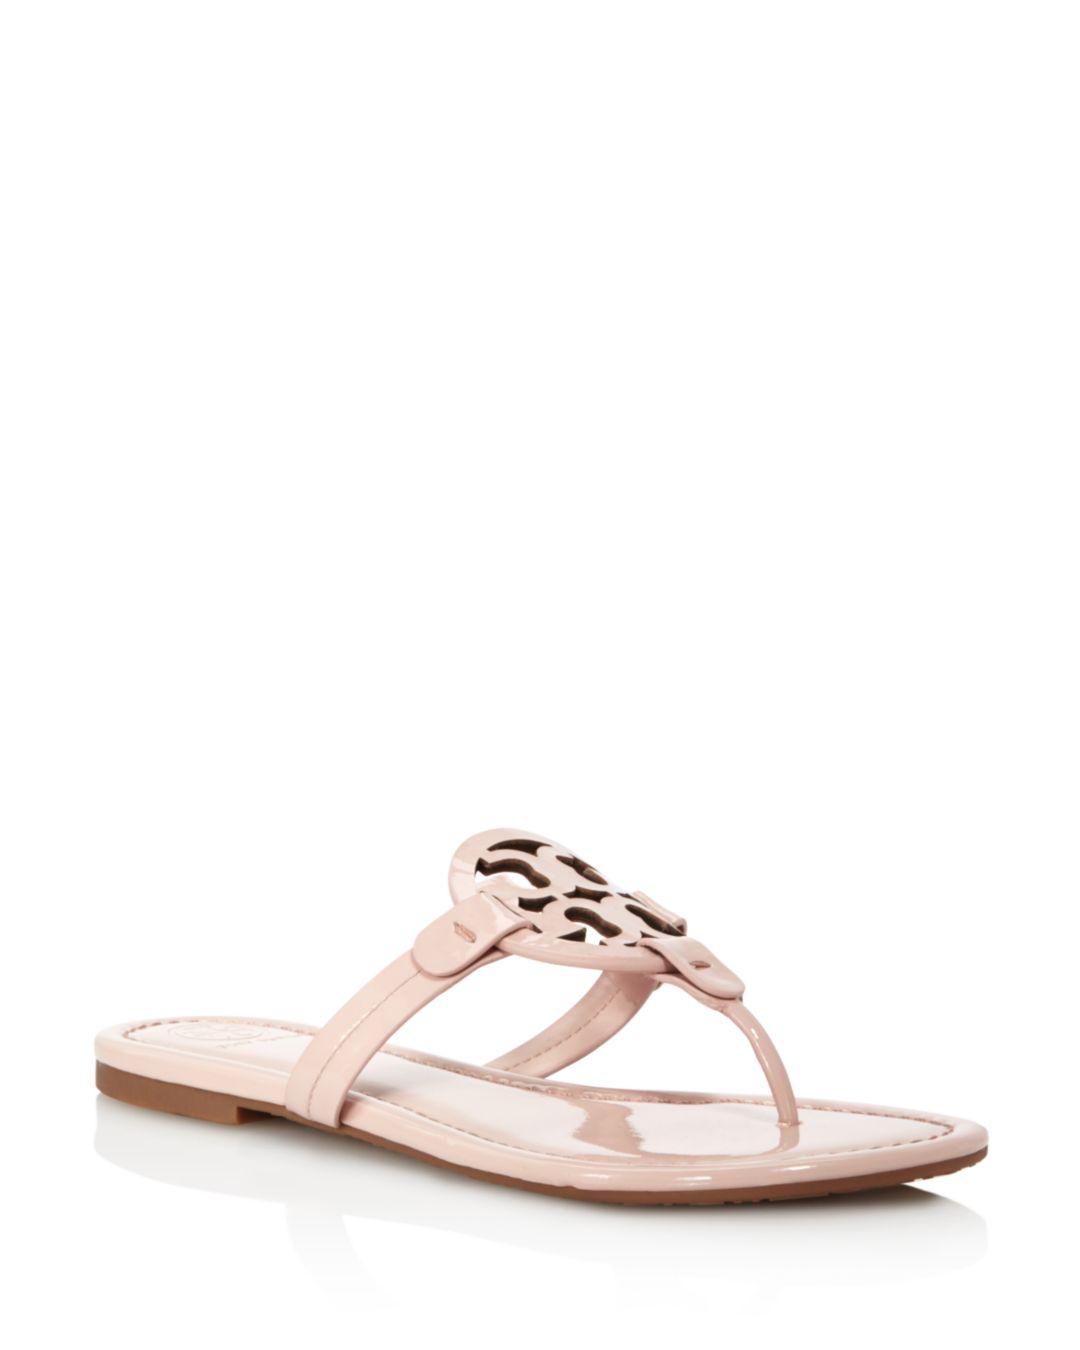 Tory Burch Miller Patent Leather Thong Sandals in Pink | Lyst